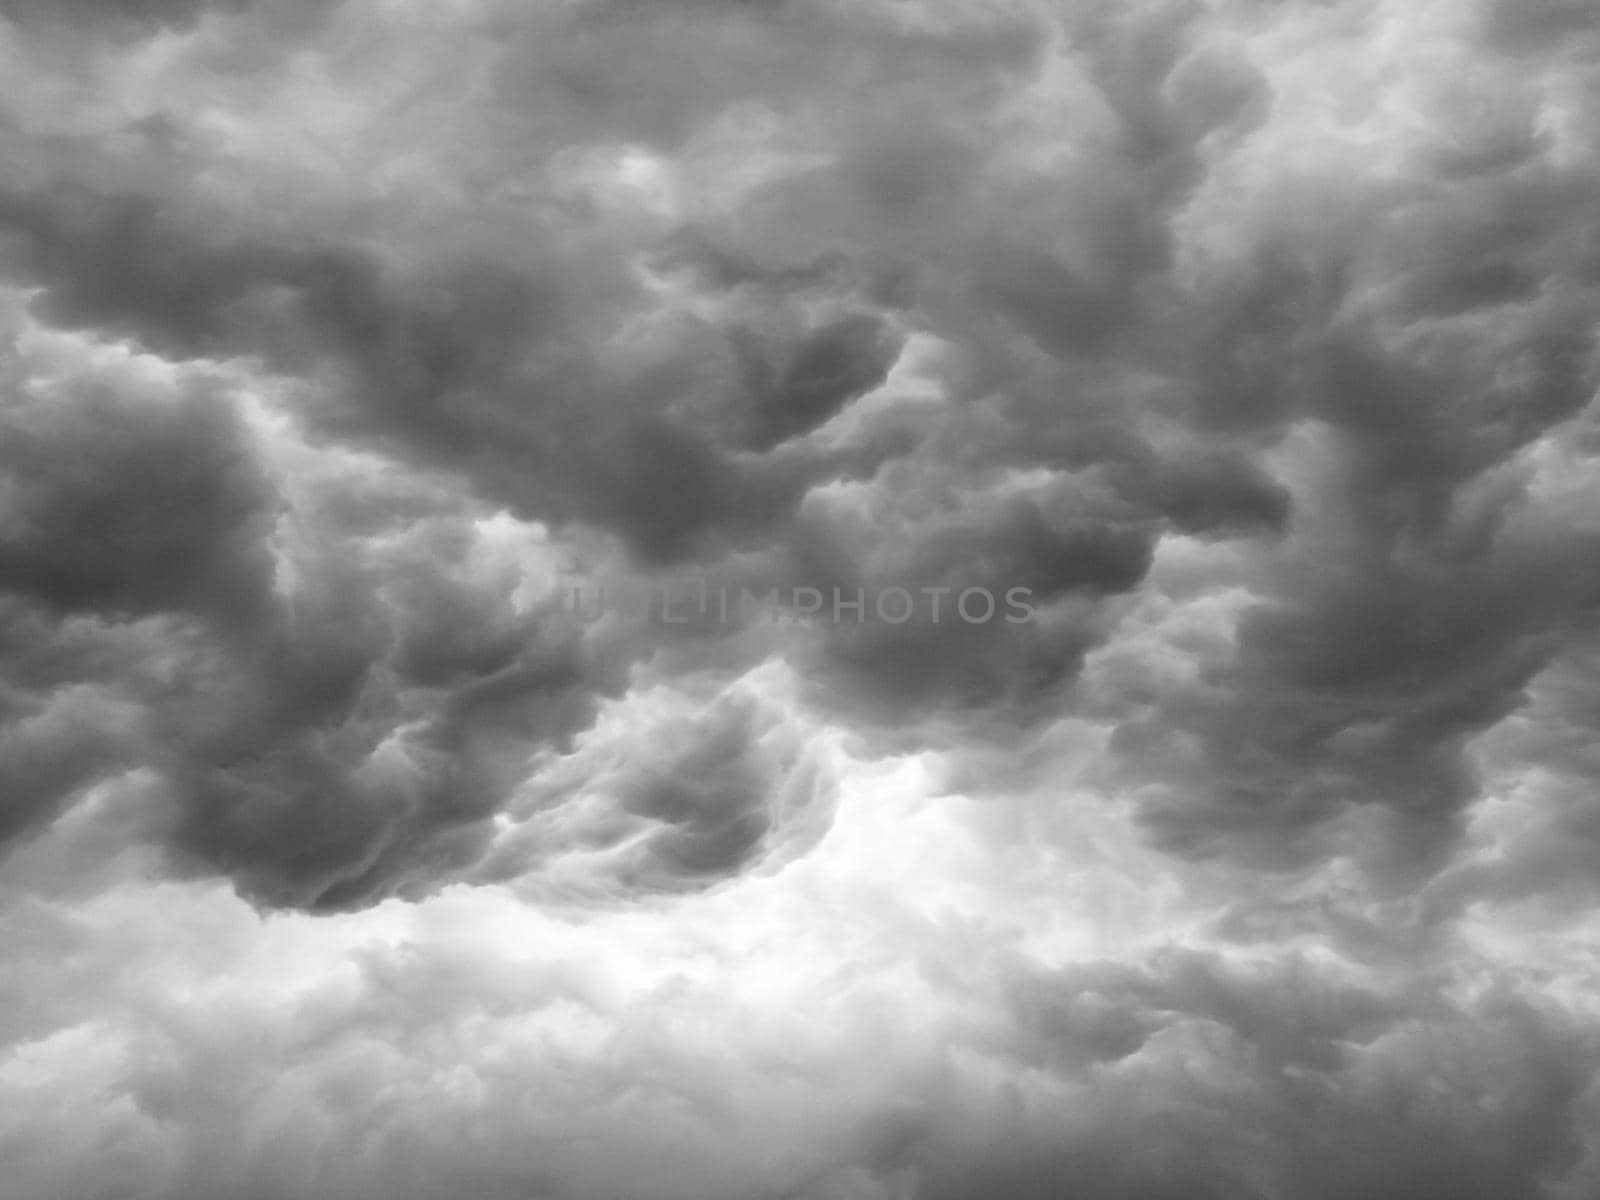 Black clouds formed before the rain. Ominous storm clouds. Sky before a thunderstorm. Used to make a background image.